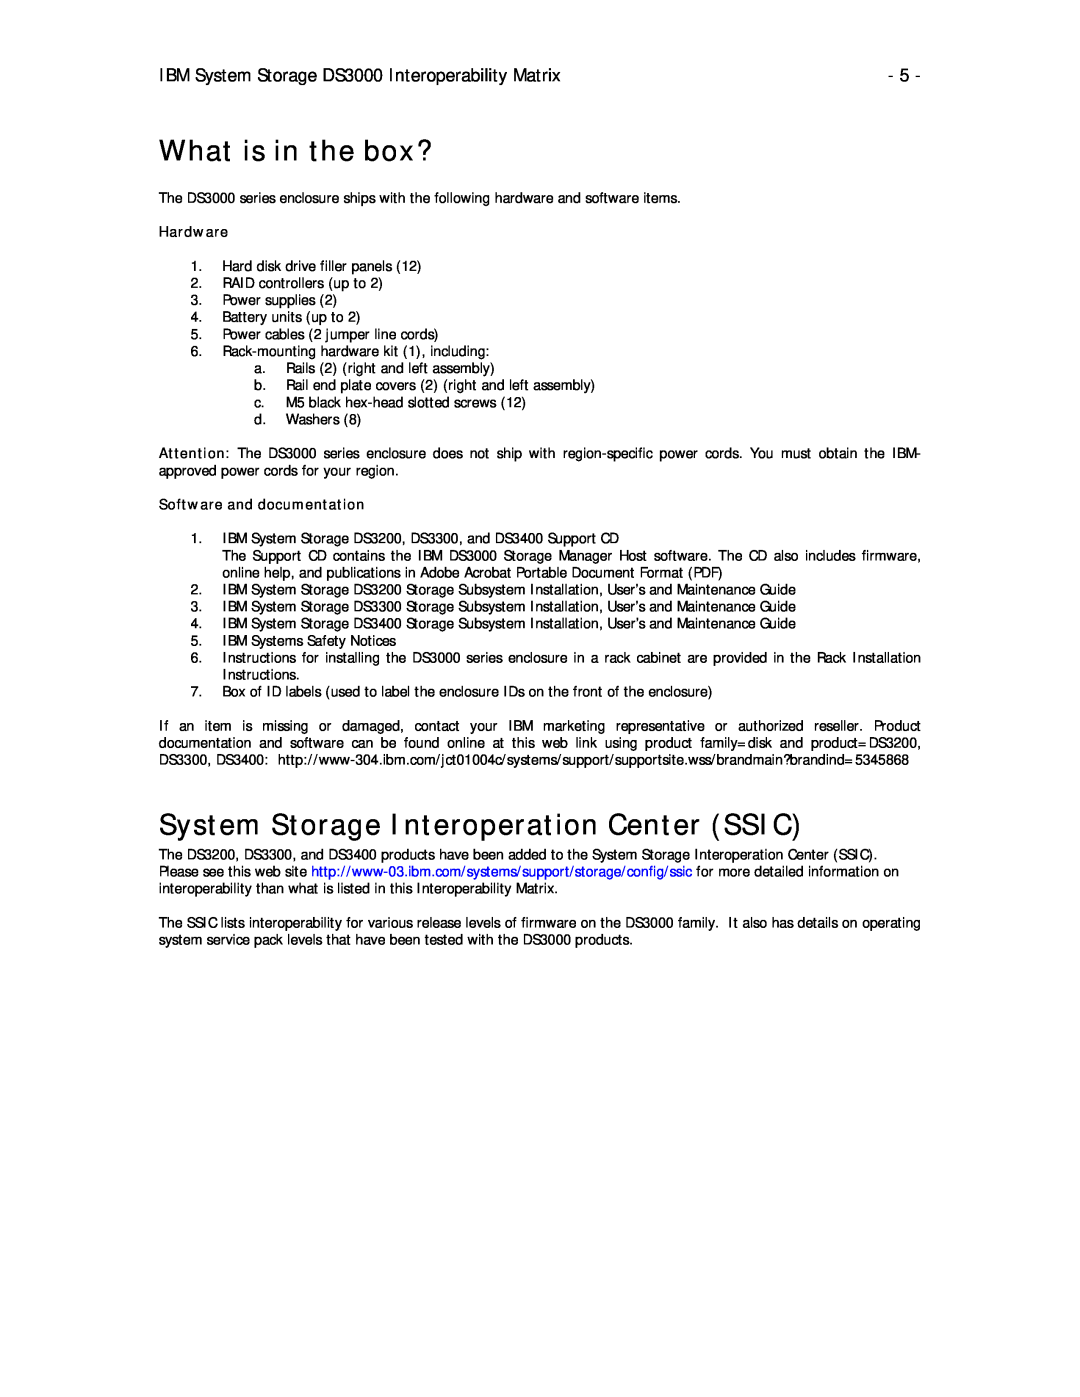 IBM DS3300, DS3200 What is in the box?, System Storage Interoperation Center SSIC, Hardware, Software and documentation 